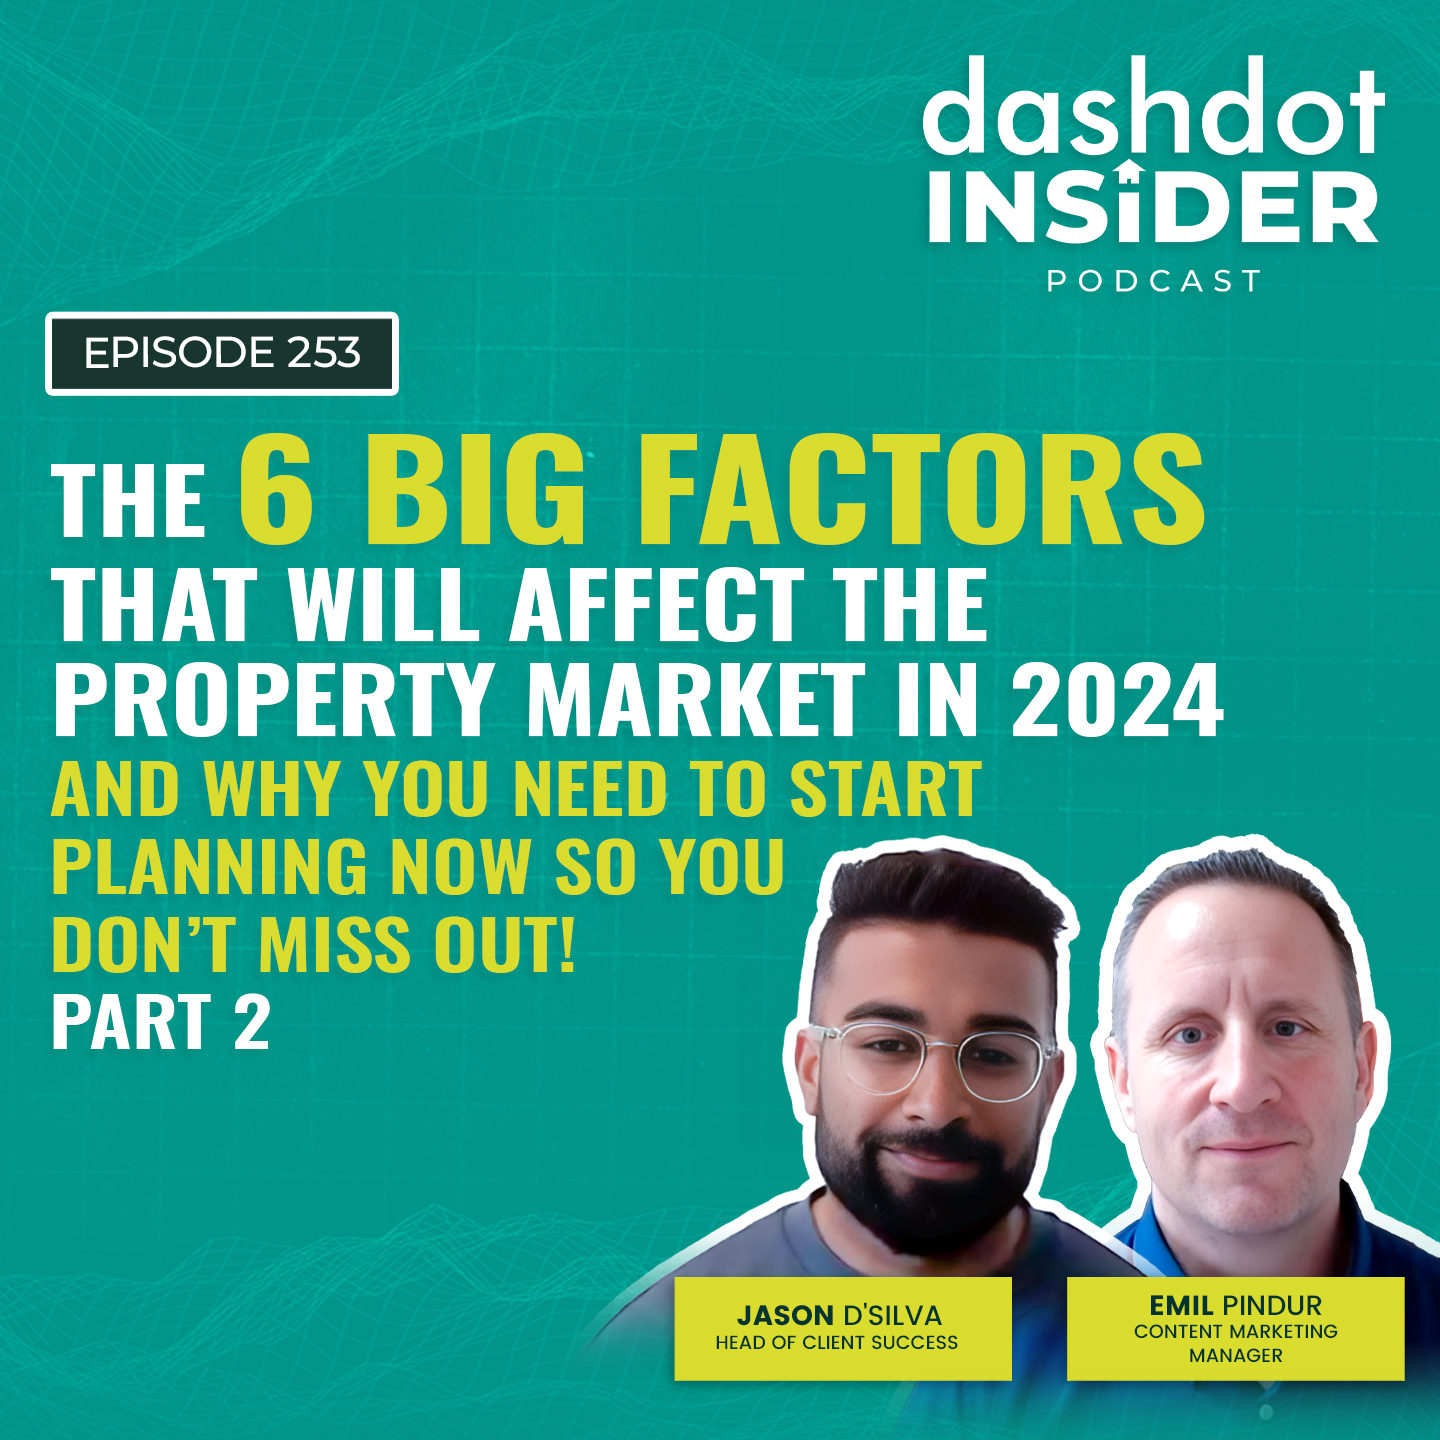 The 6 Big Factors That Will Affect The Property Market In 2024 And Why You Need To Start Planning Now So You Don’t Miss Out! - Part 2 | #253